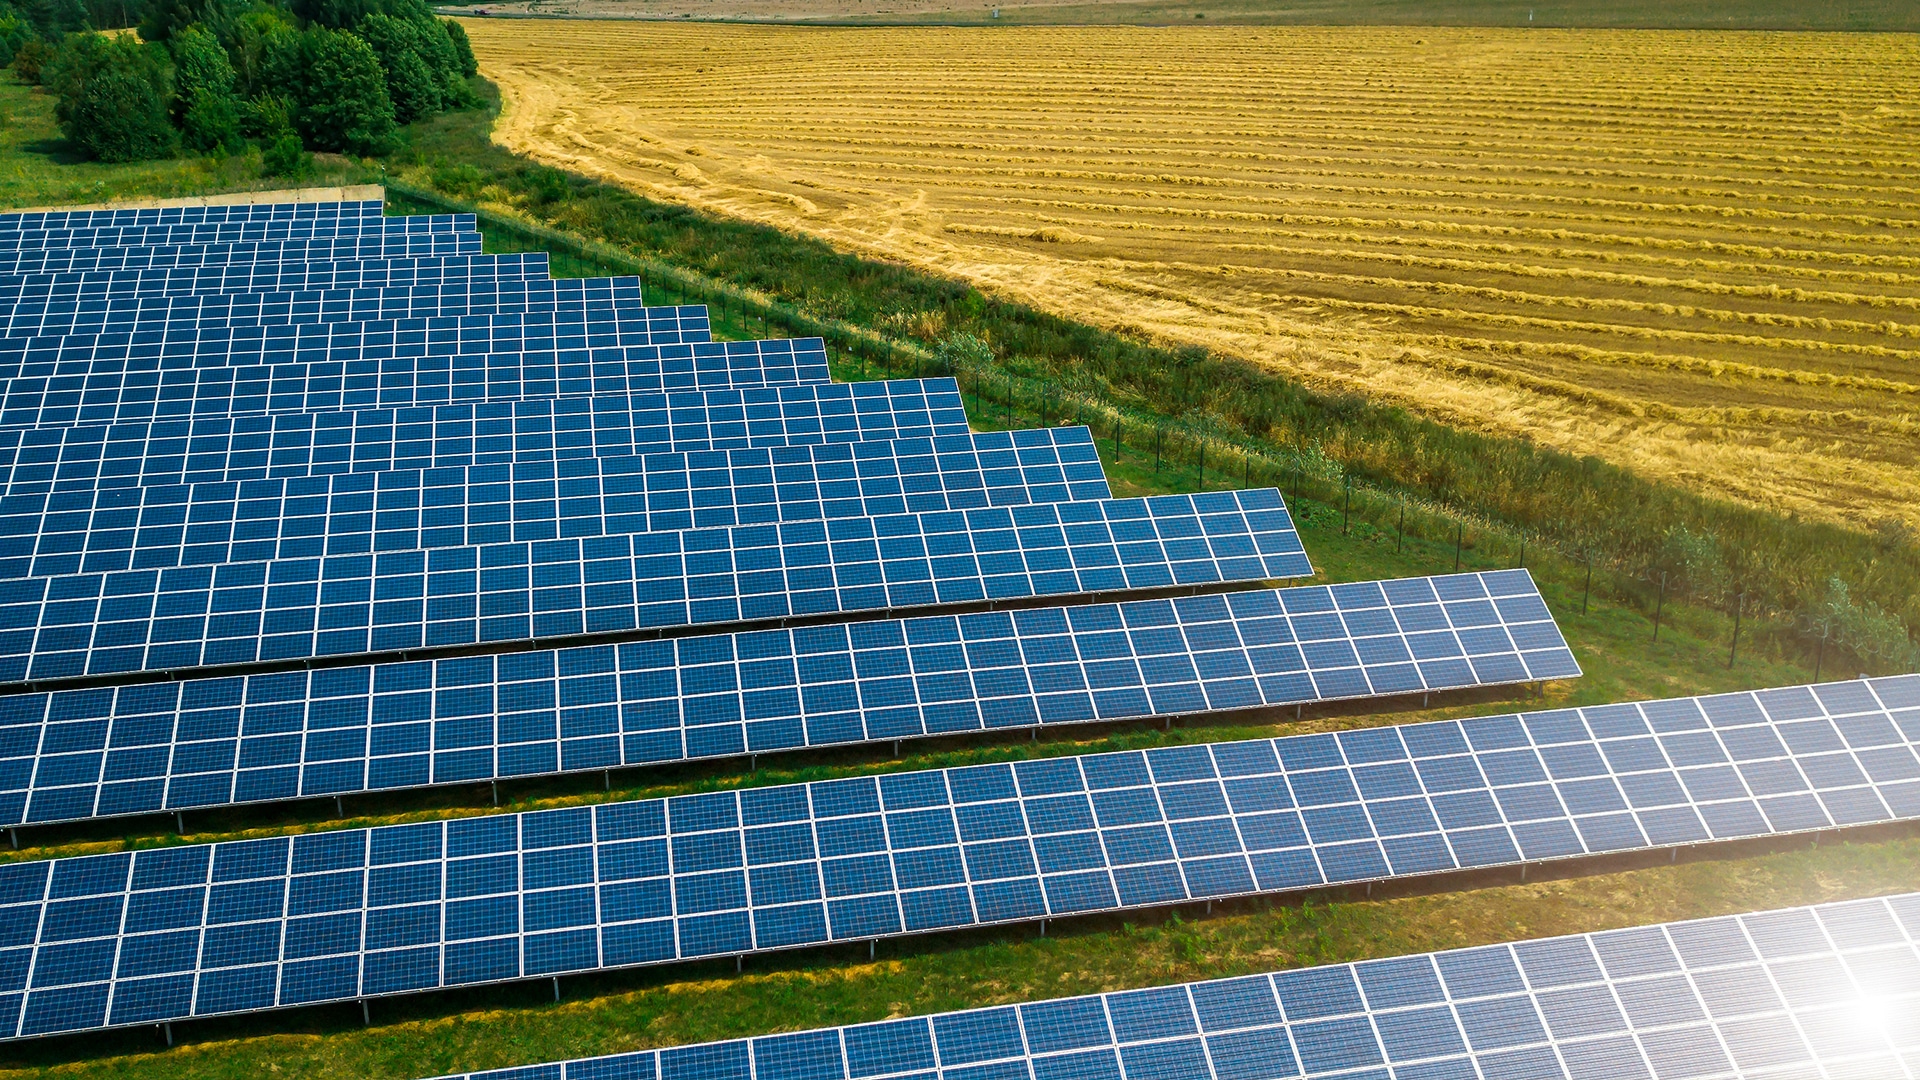 Electrum to Execute One of Poland’s Largest Photovoltaic Projects Using Solar Trackers